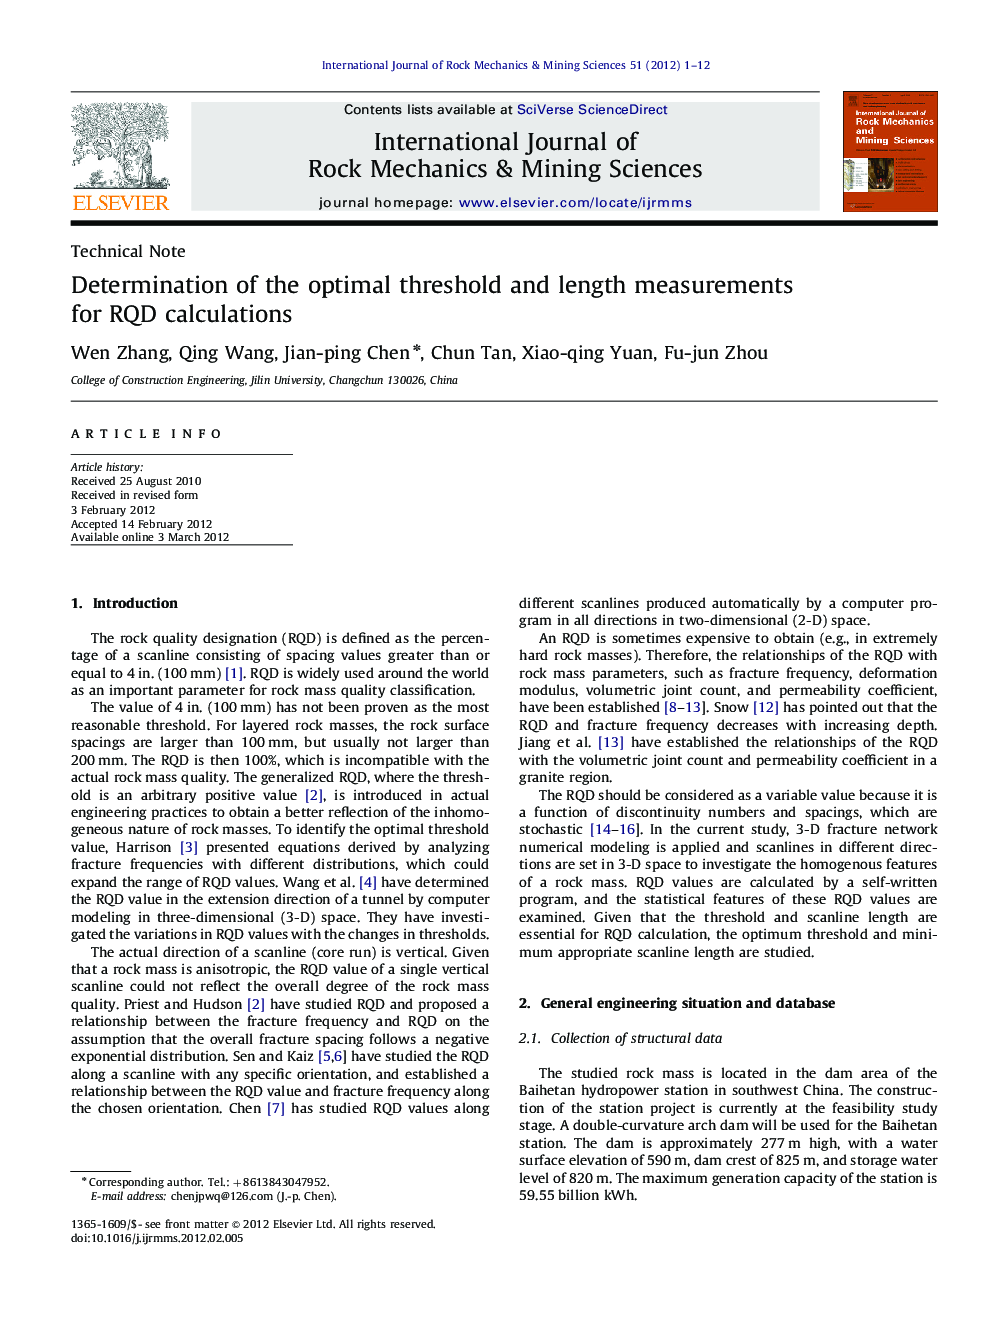 Determination of the optimal threshold and length measurements for RQD calculations